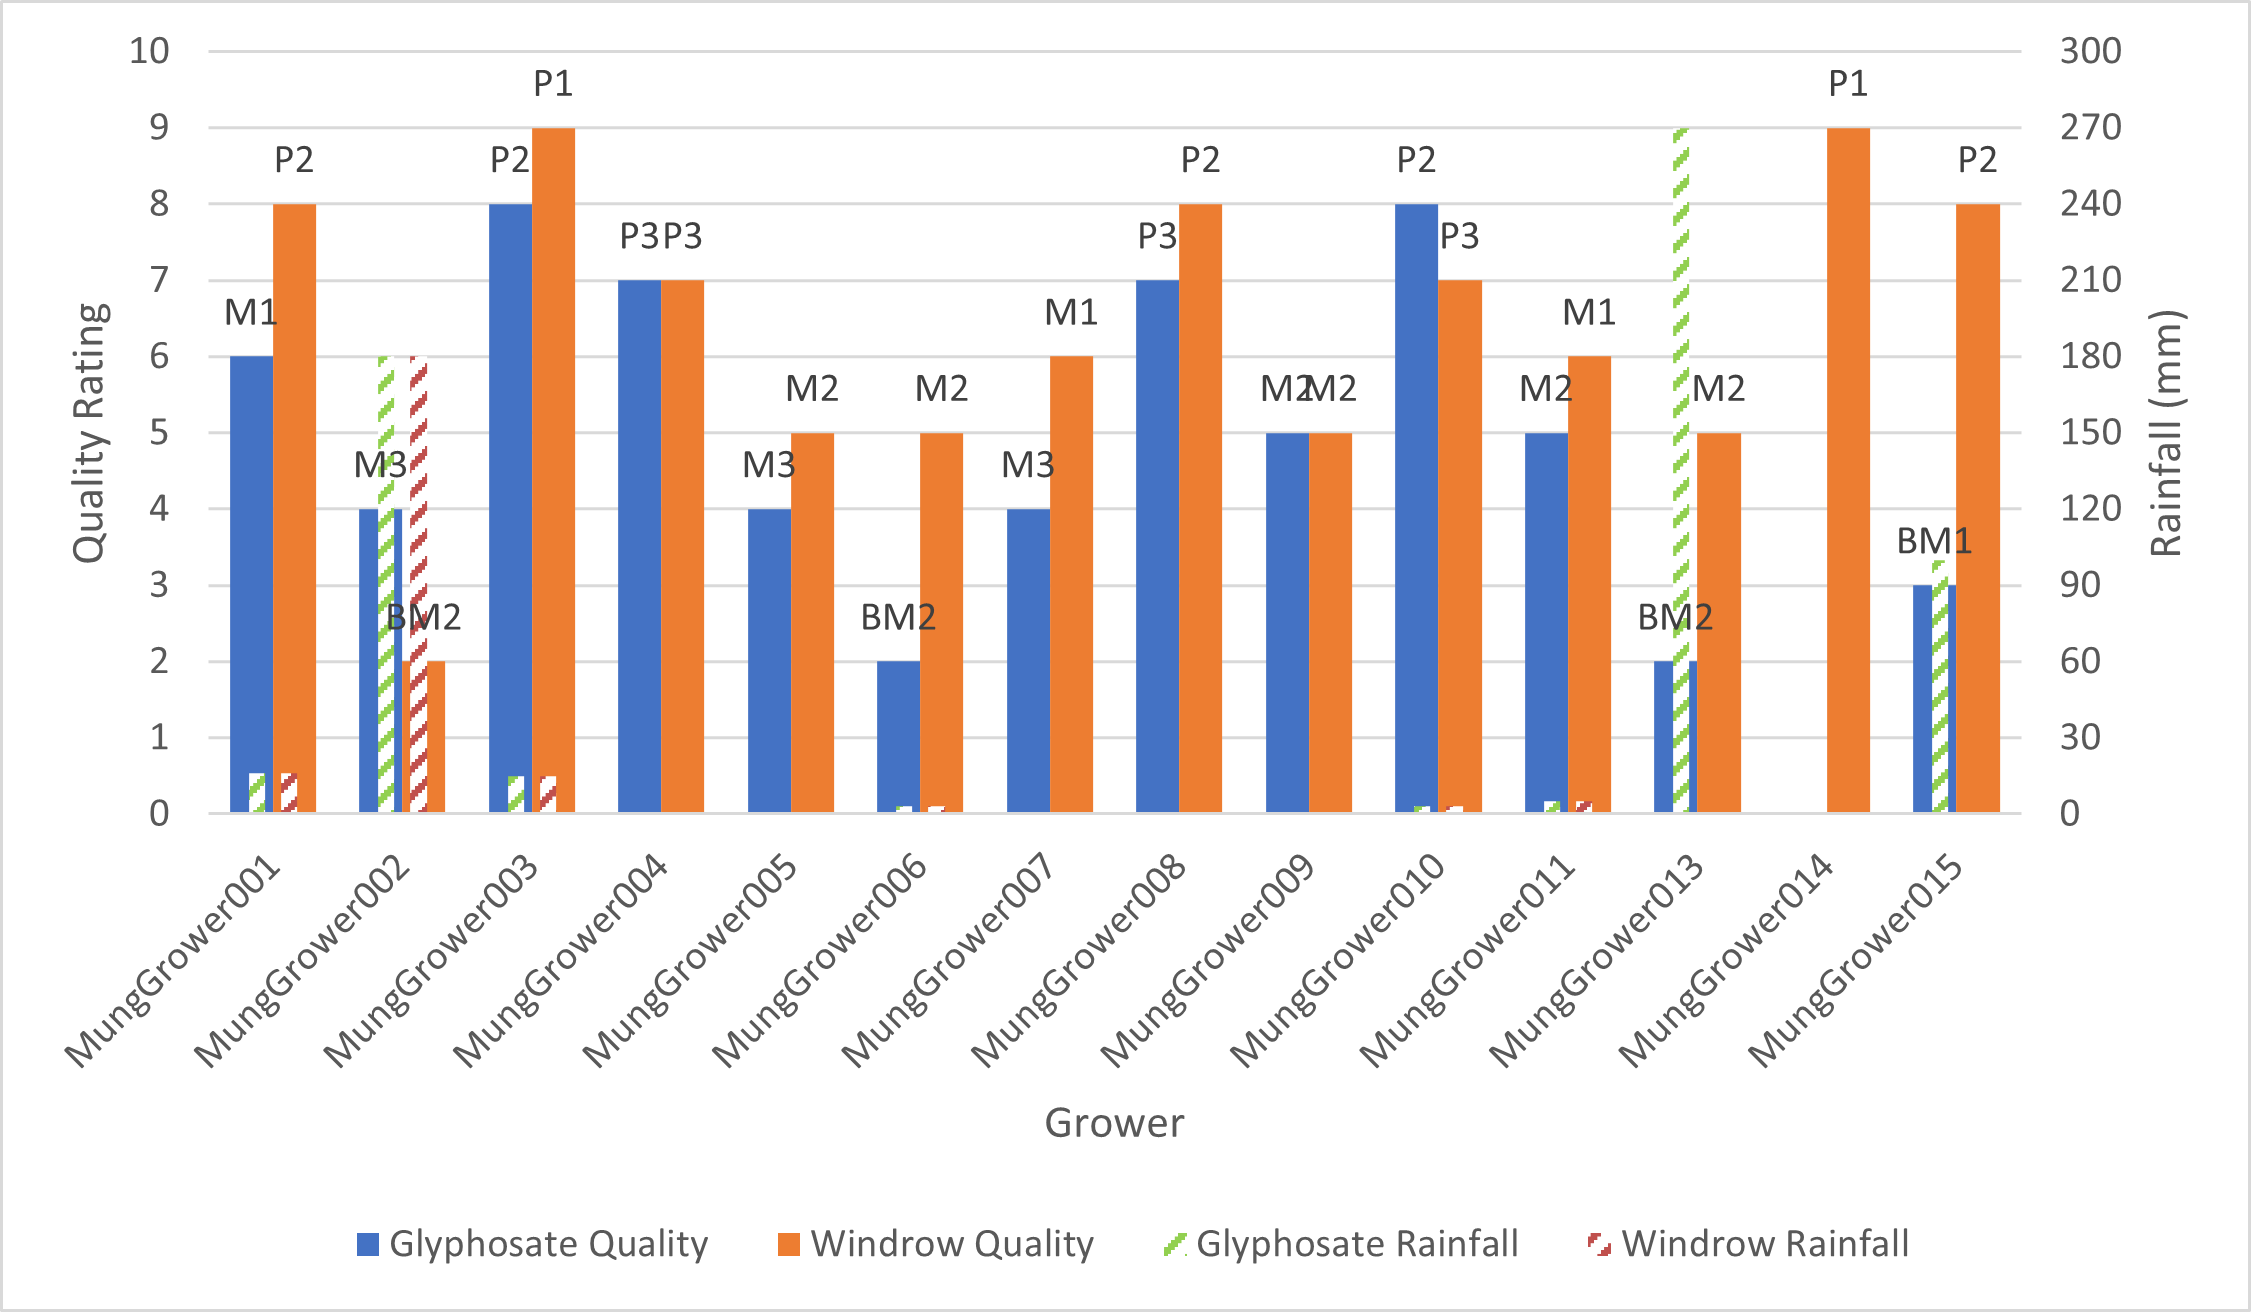 Column graph showing quality rating for glyphosate and windrowed mungbeans. Dashed bars represent rainfall between desiccation and harvest. Letters and number on top of bar represent grain quality rating.